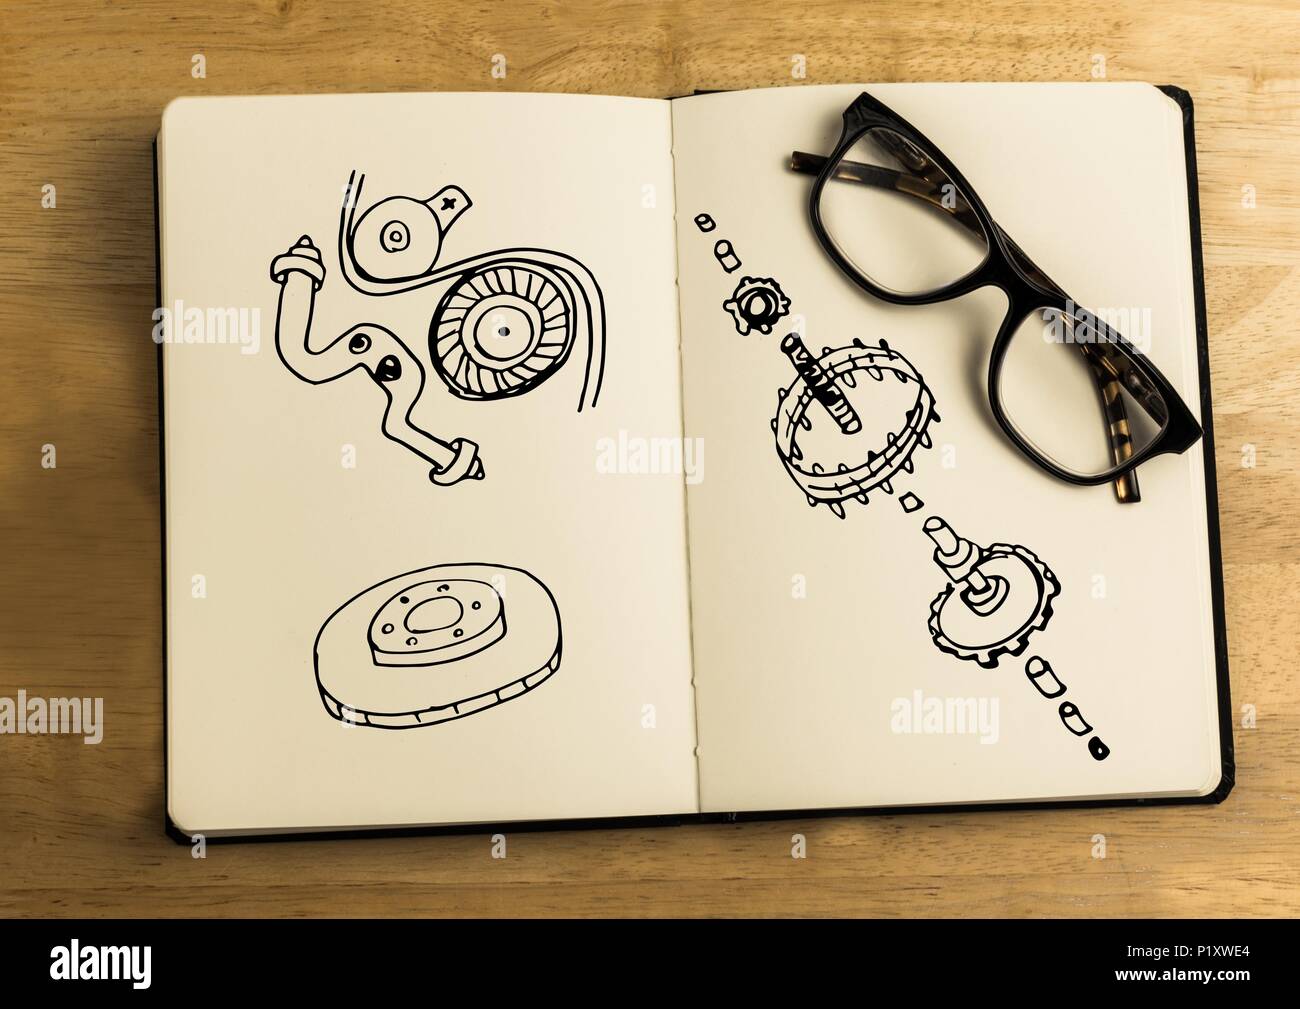 Sketch of mechanical engineering elements in sketch pad Stock Photo